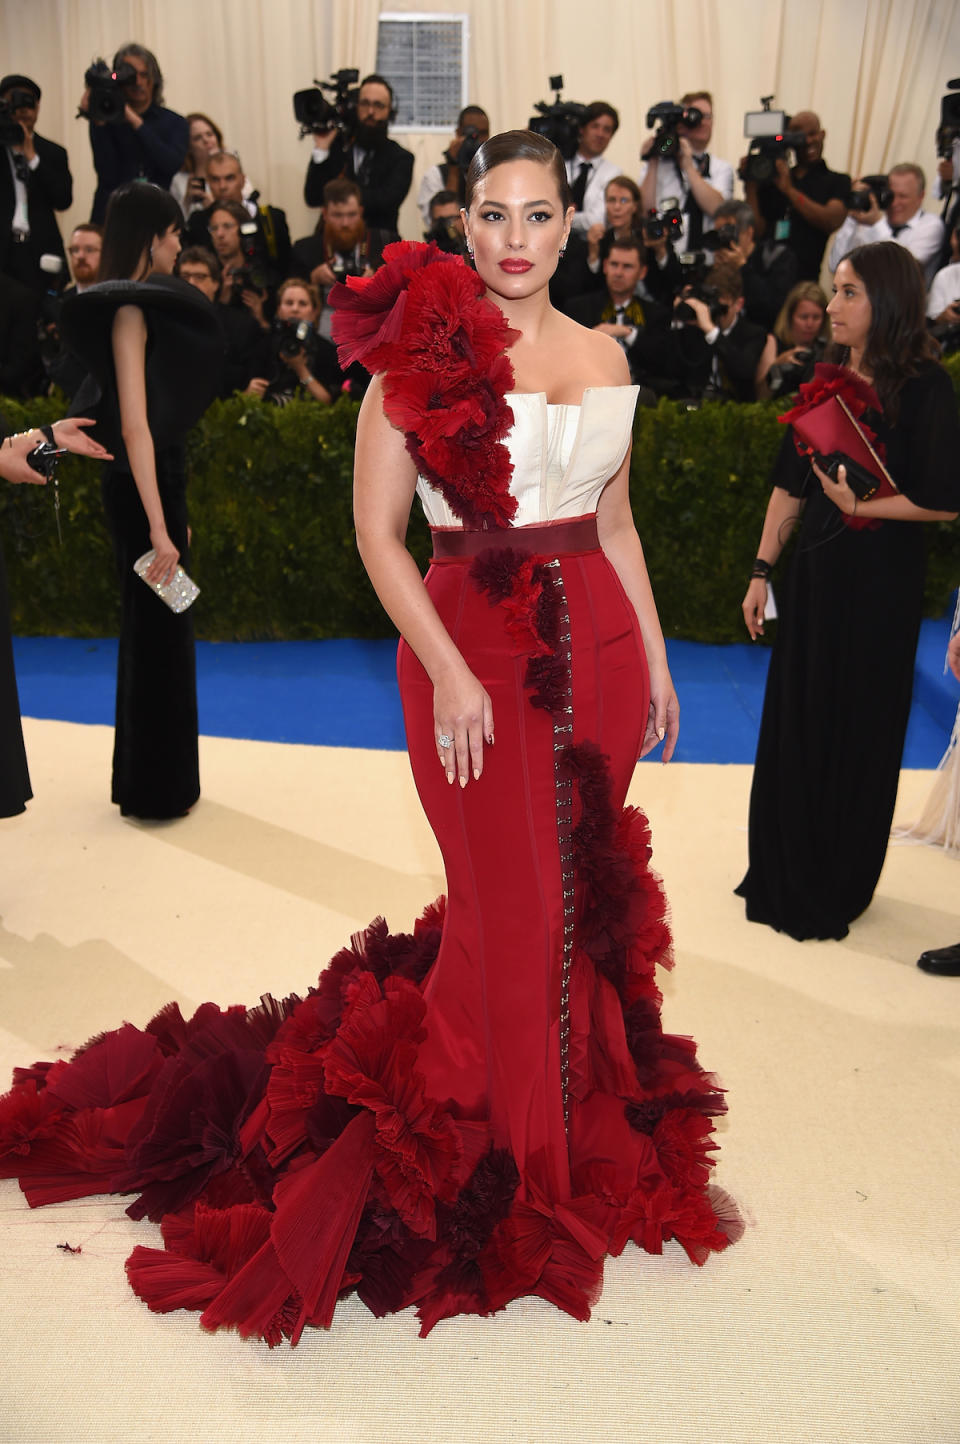 <p>The curvy model wore a red and white custom look from fast fashion label H&M. (Photo by Dimitrios Kambouris/Getty Images) </p>